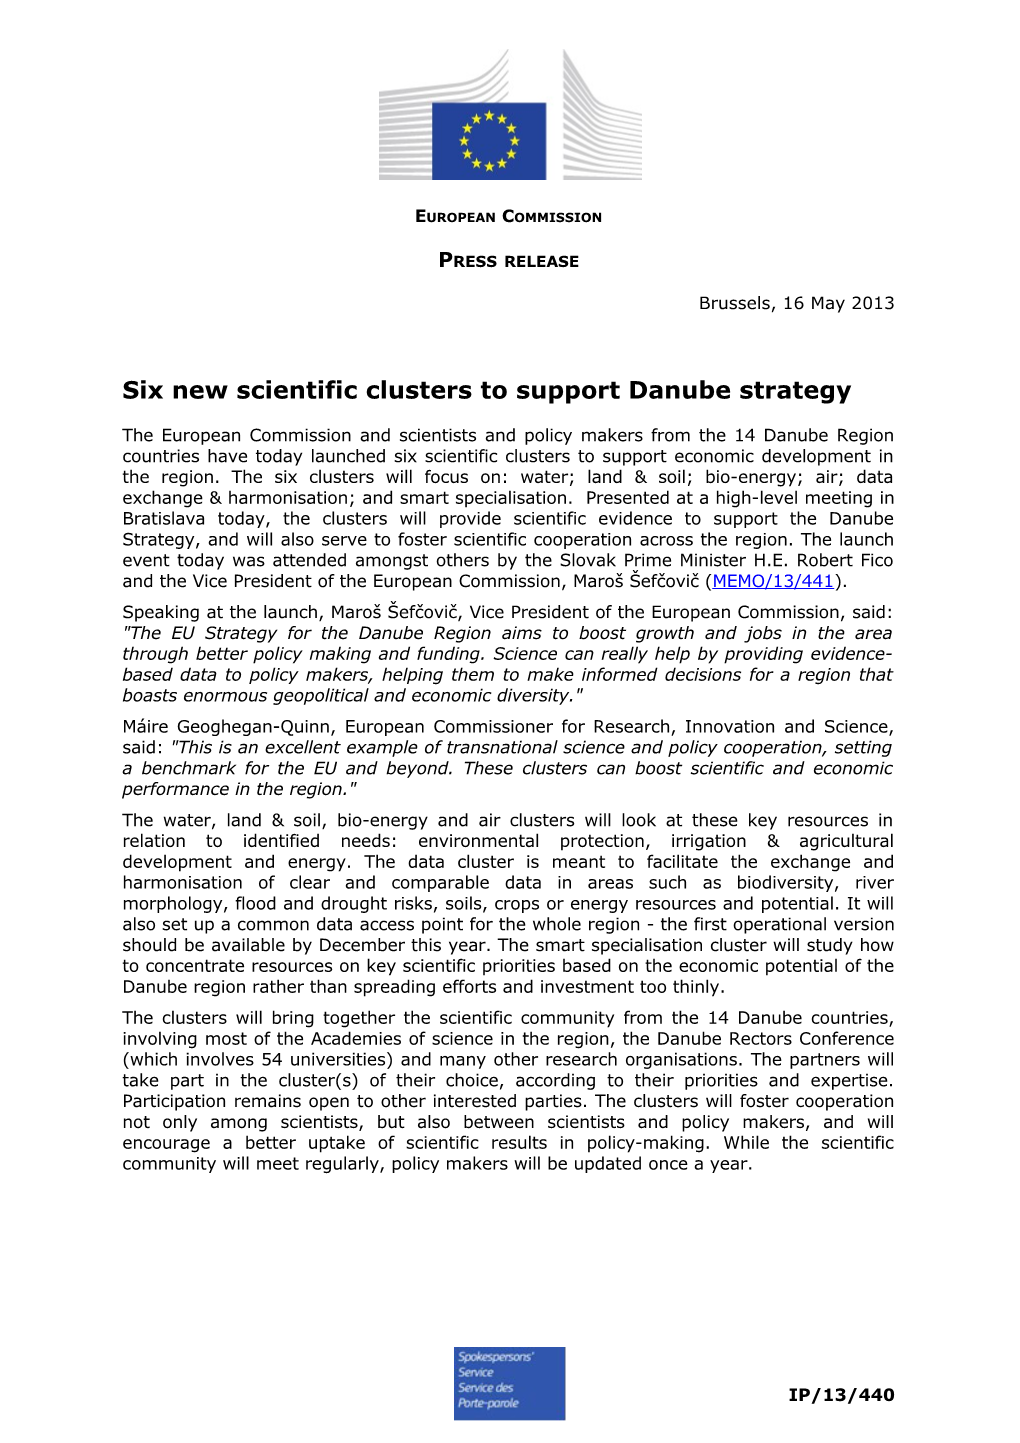 Six New Scientific Clusters to Support Danube Strategy